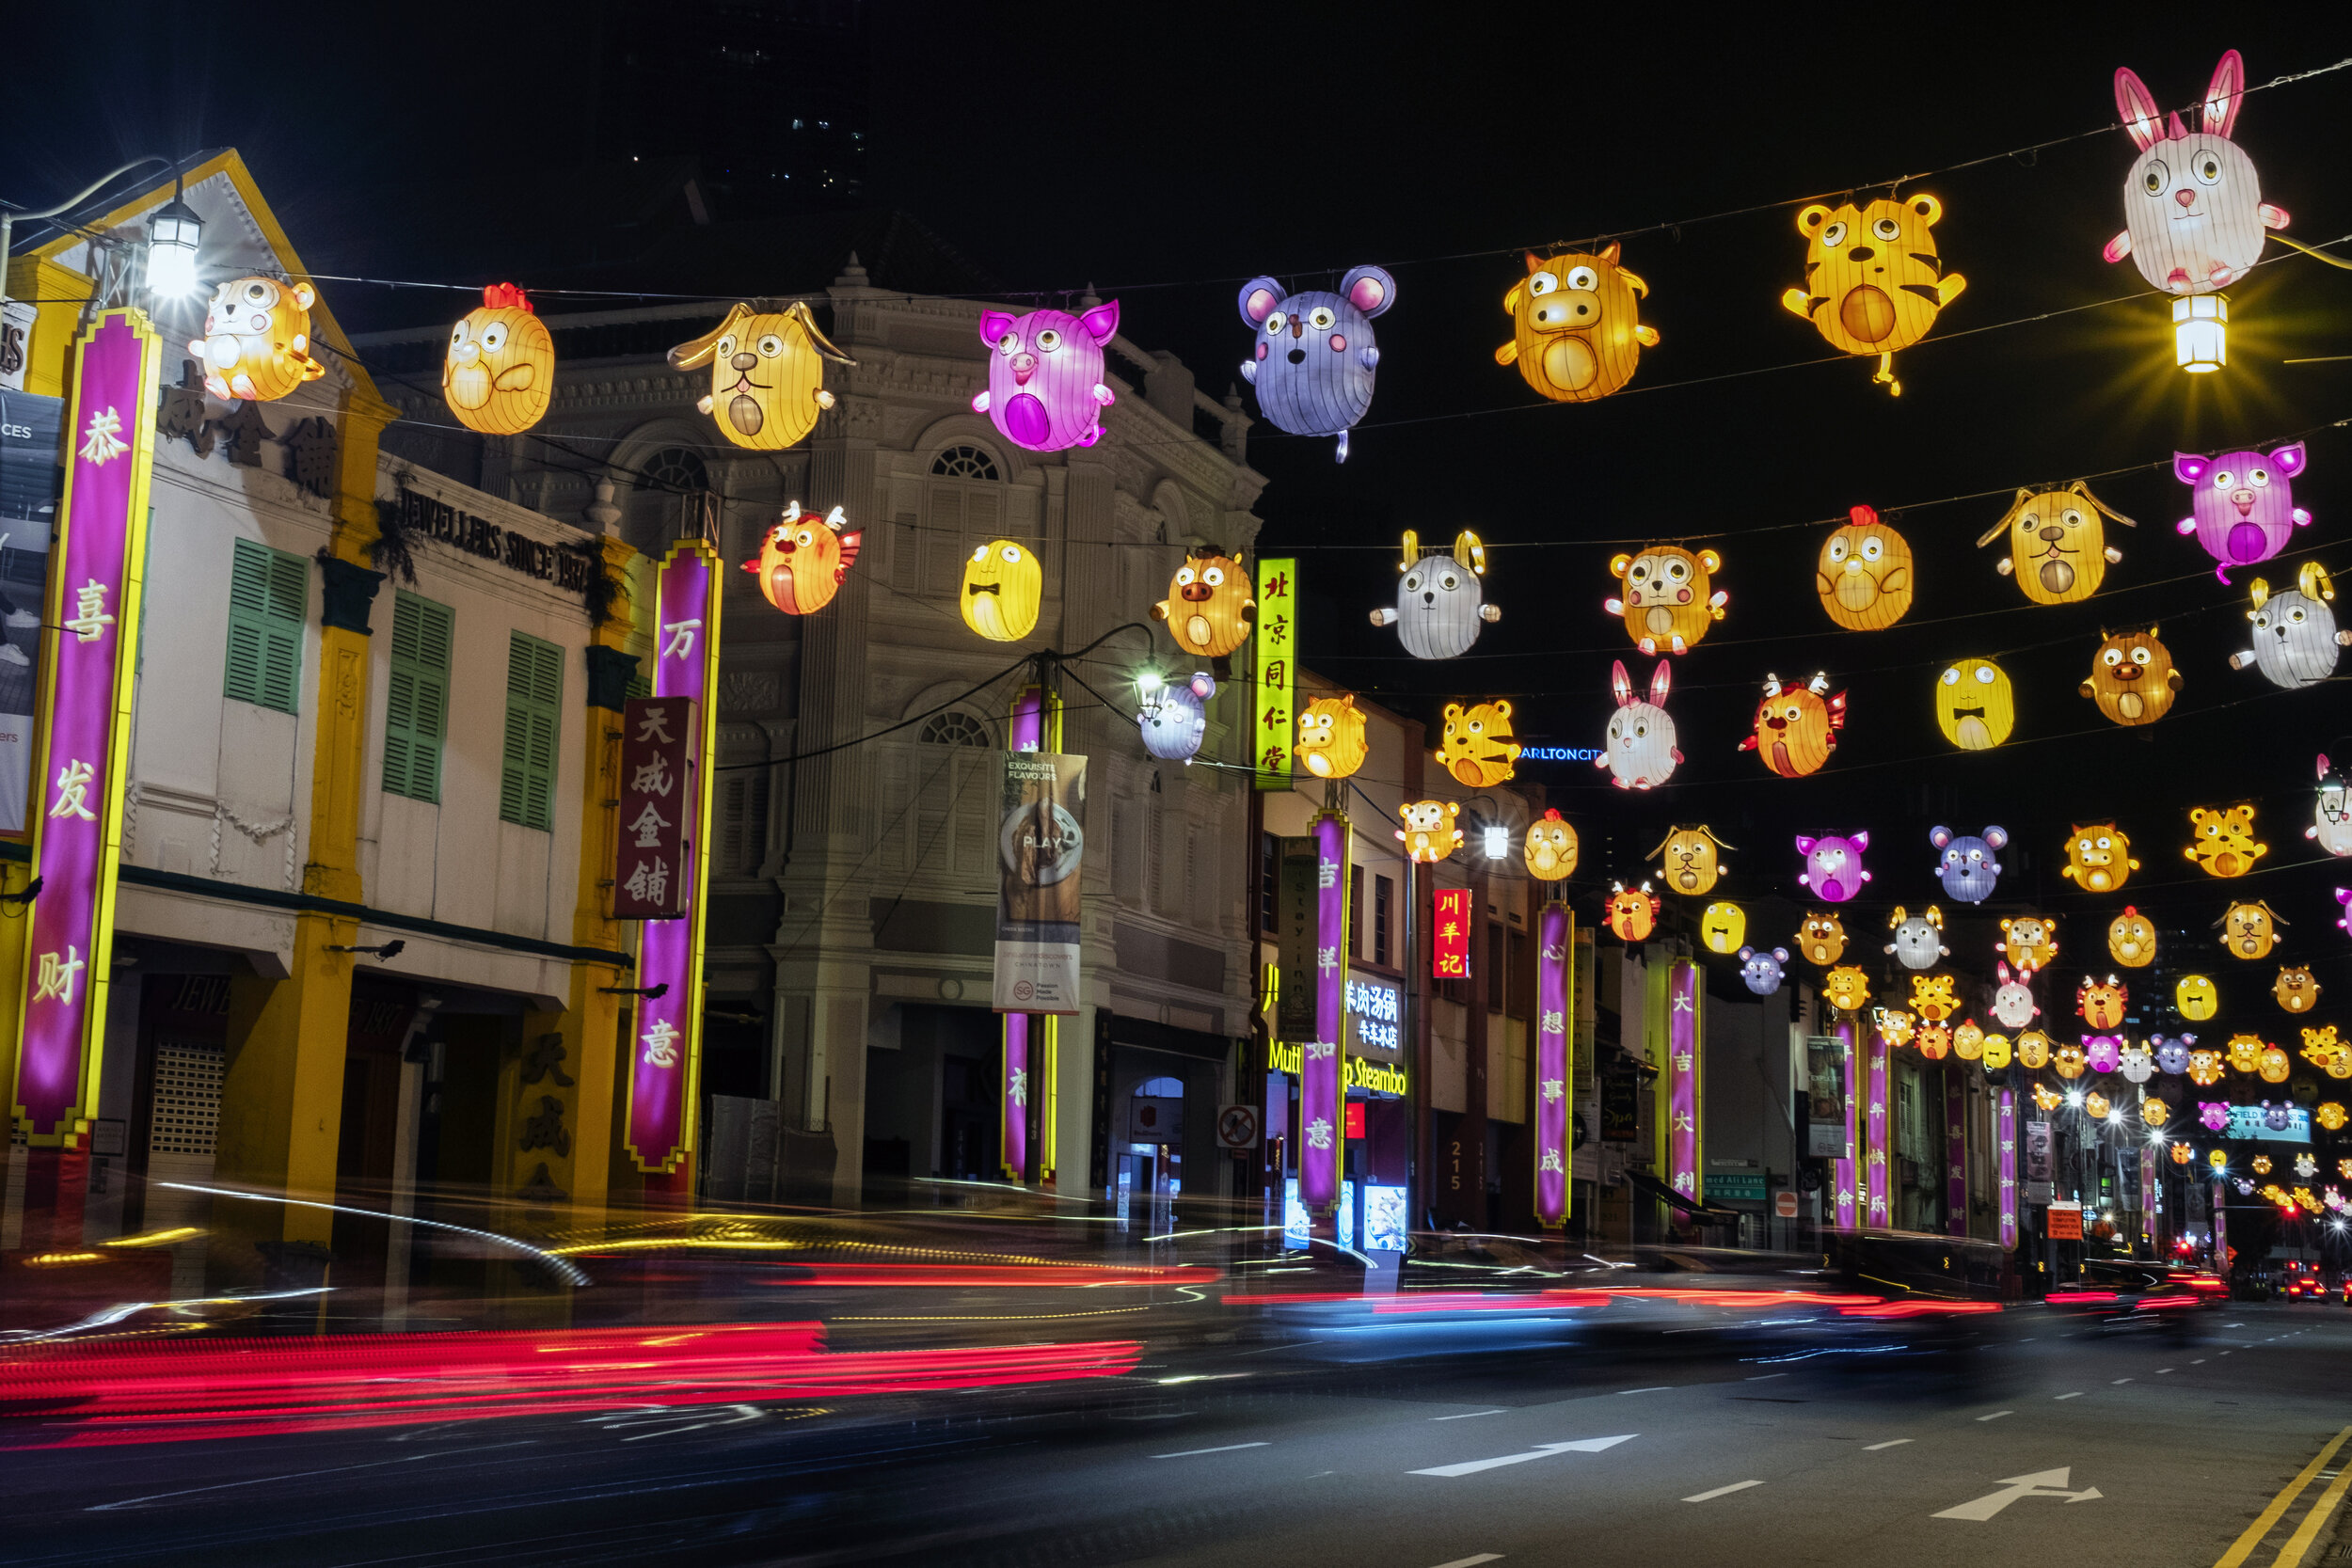  Lighting decorations in the shape of the Chinese zodiac animals hang above a road ahead of the Chinese Lunar New Year of the Ox, otherwise known as the Spring Festival, in Singapore's Chinatown, January 31, 2021. Picture taken with long exposure. RE